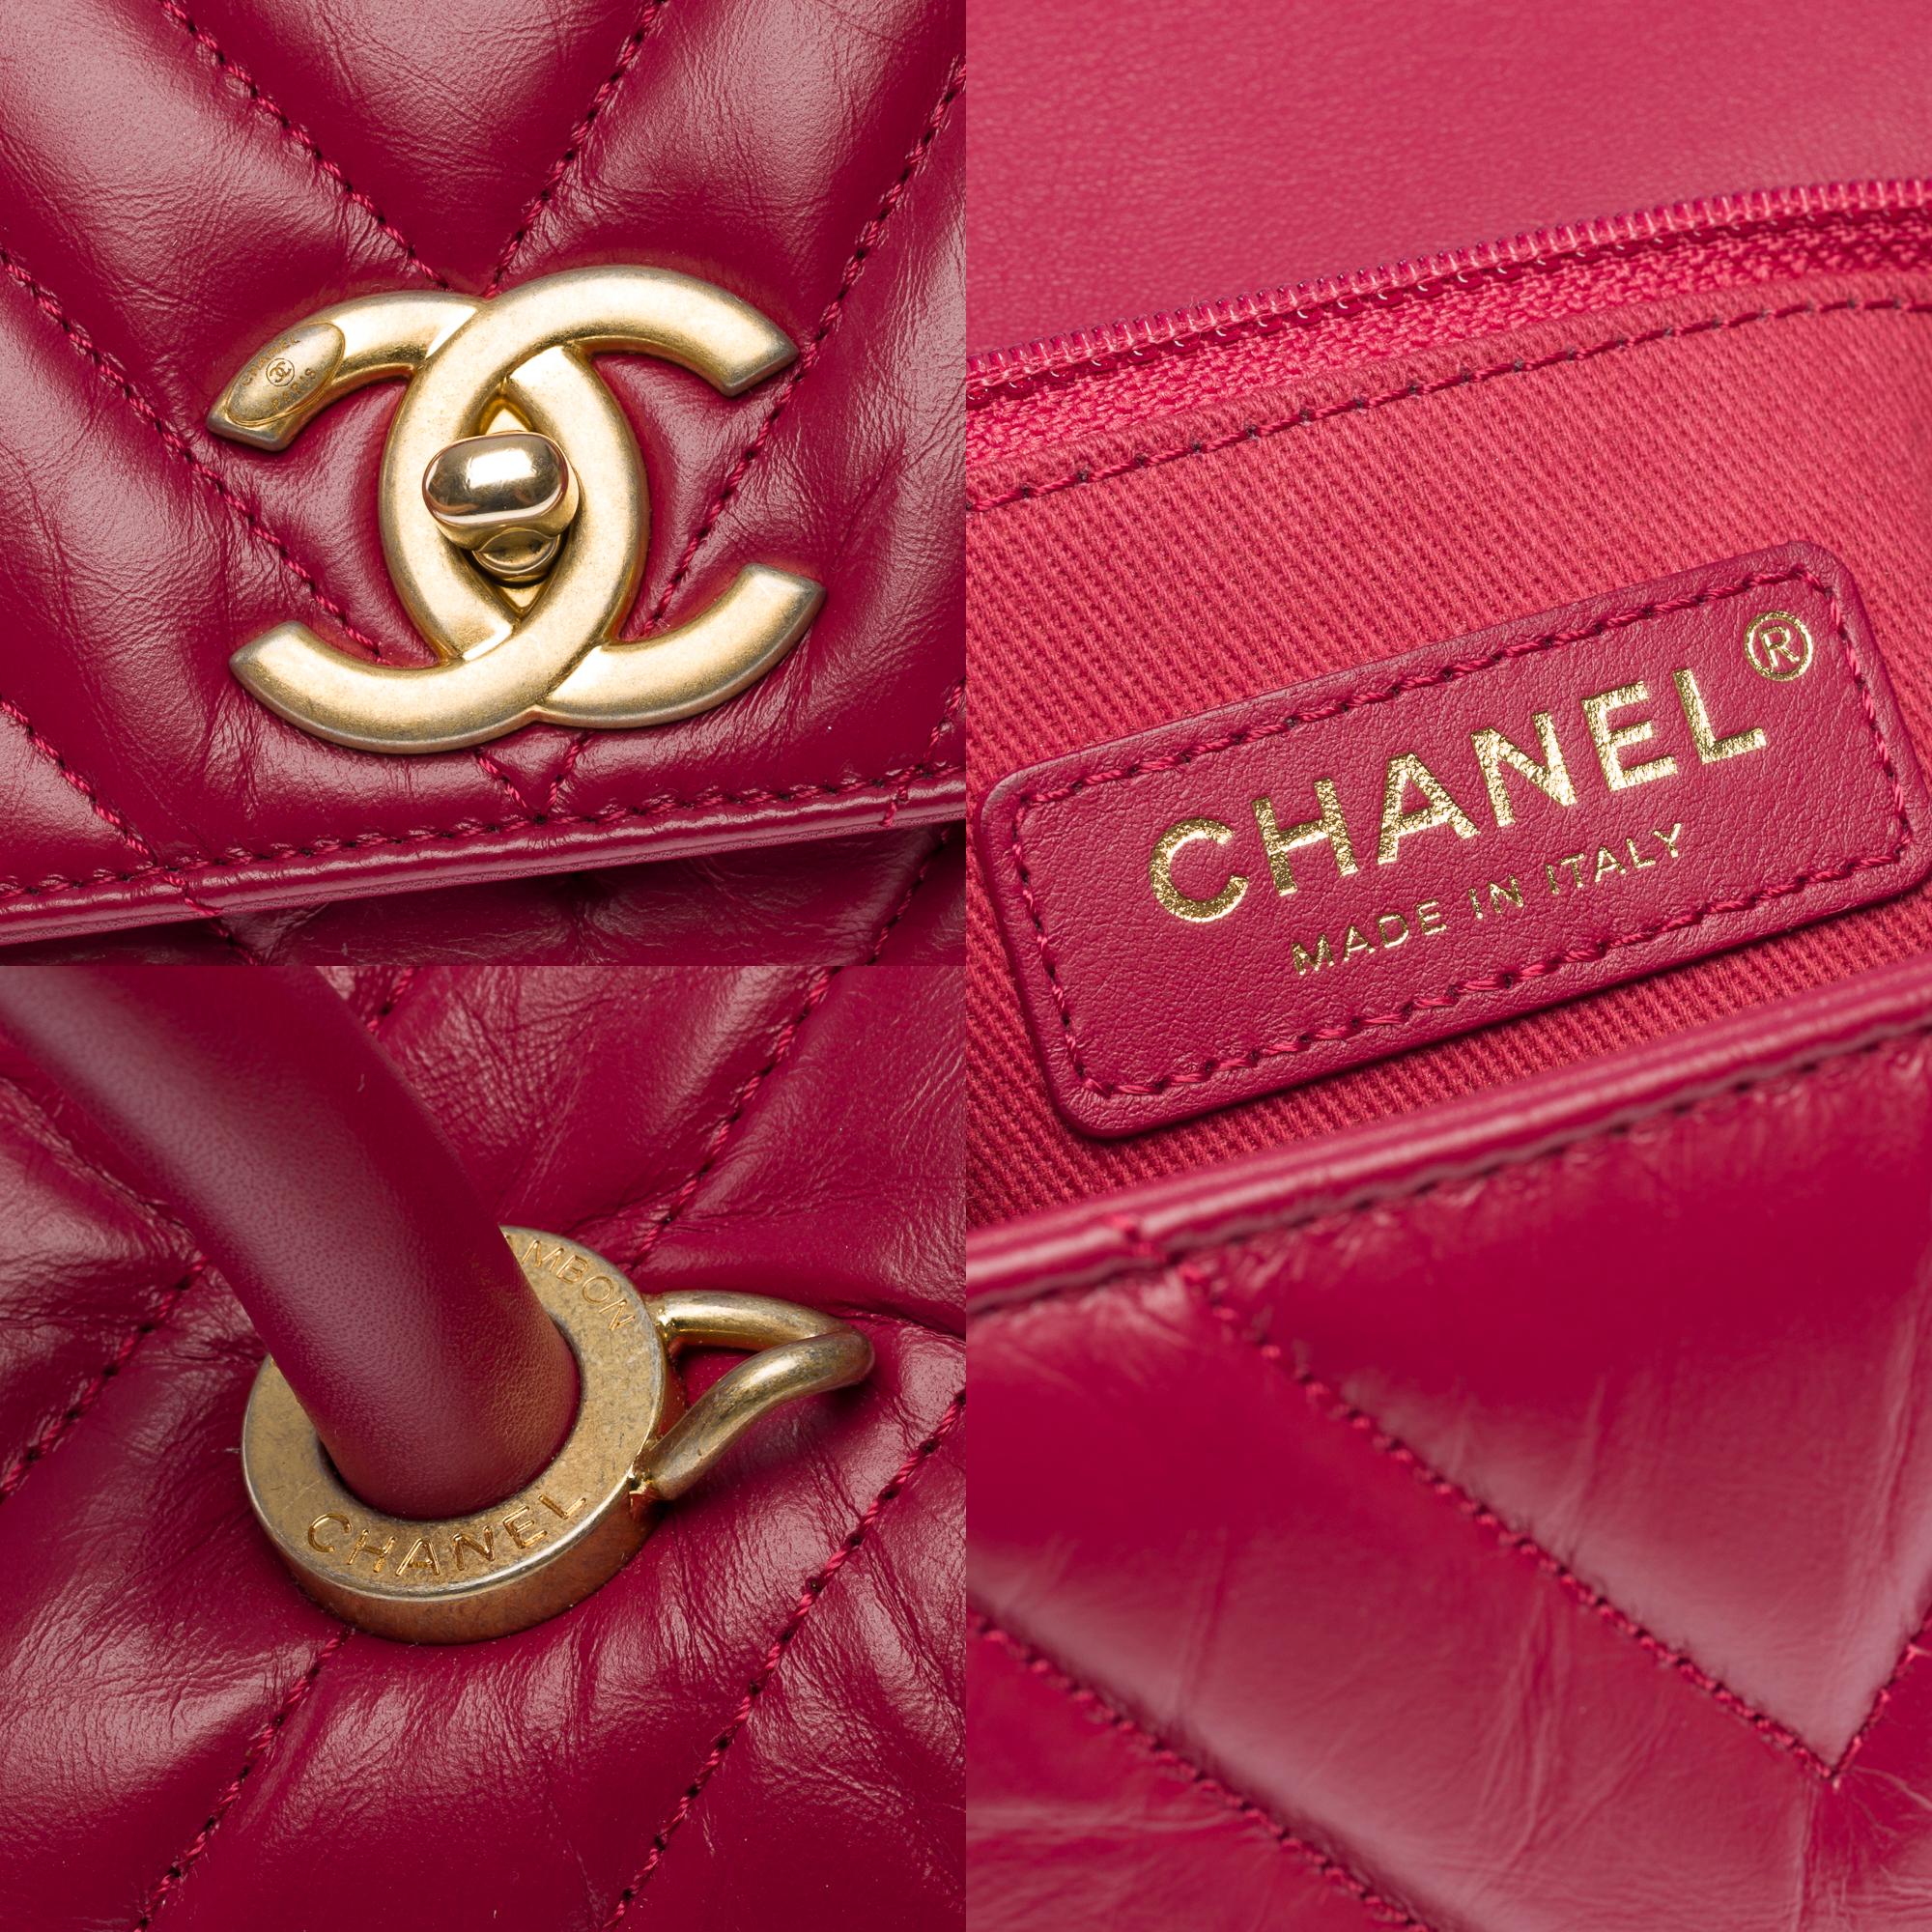 Amazing Chanel Coco handle handbag in Red lambskin leather, MGHW For Sale 3